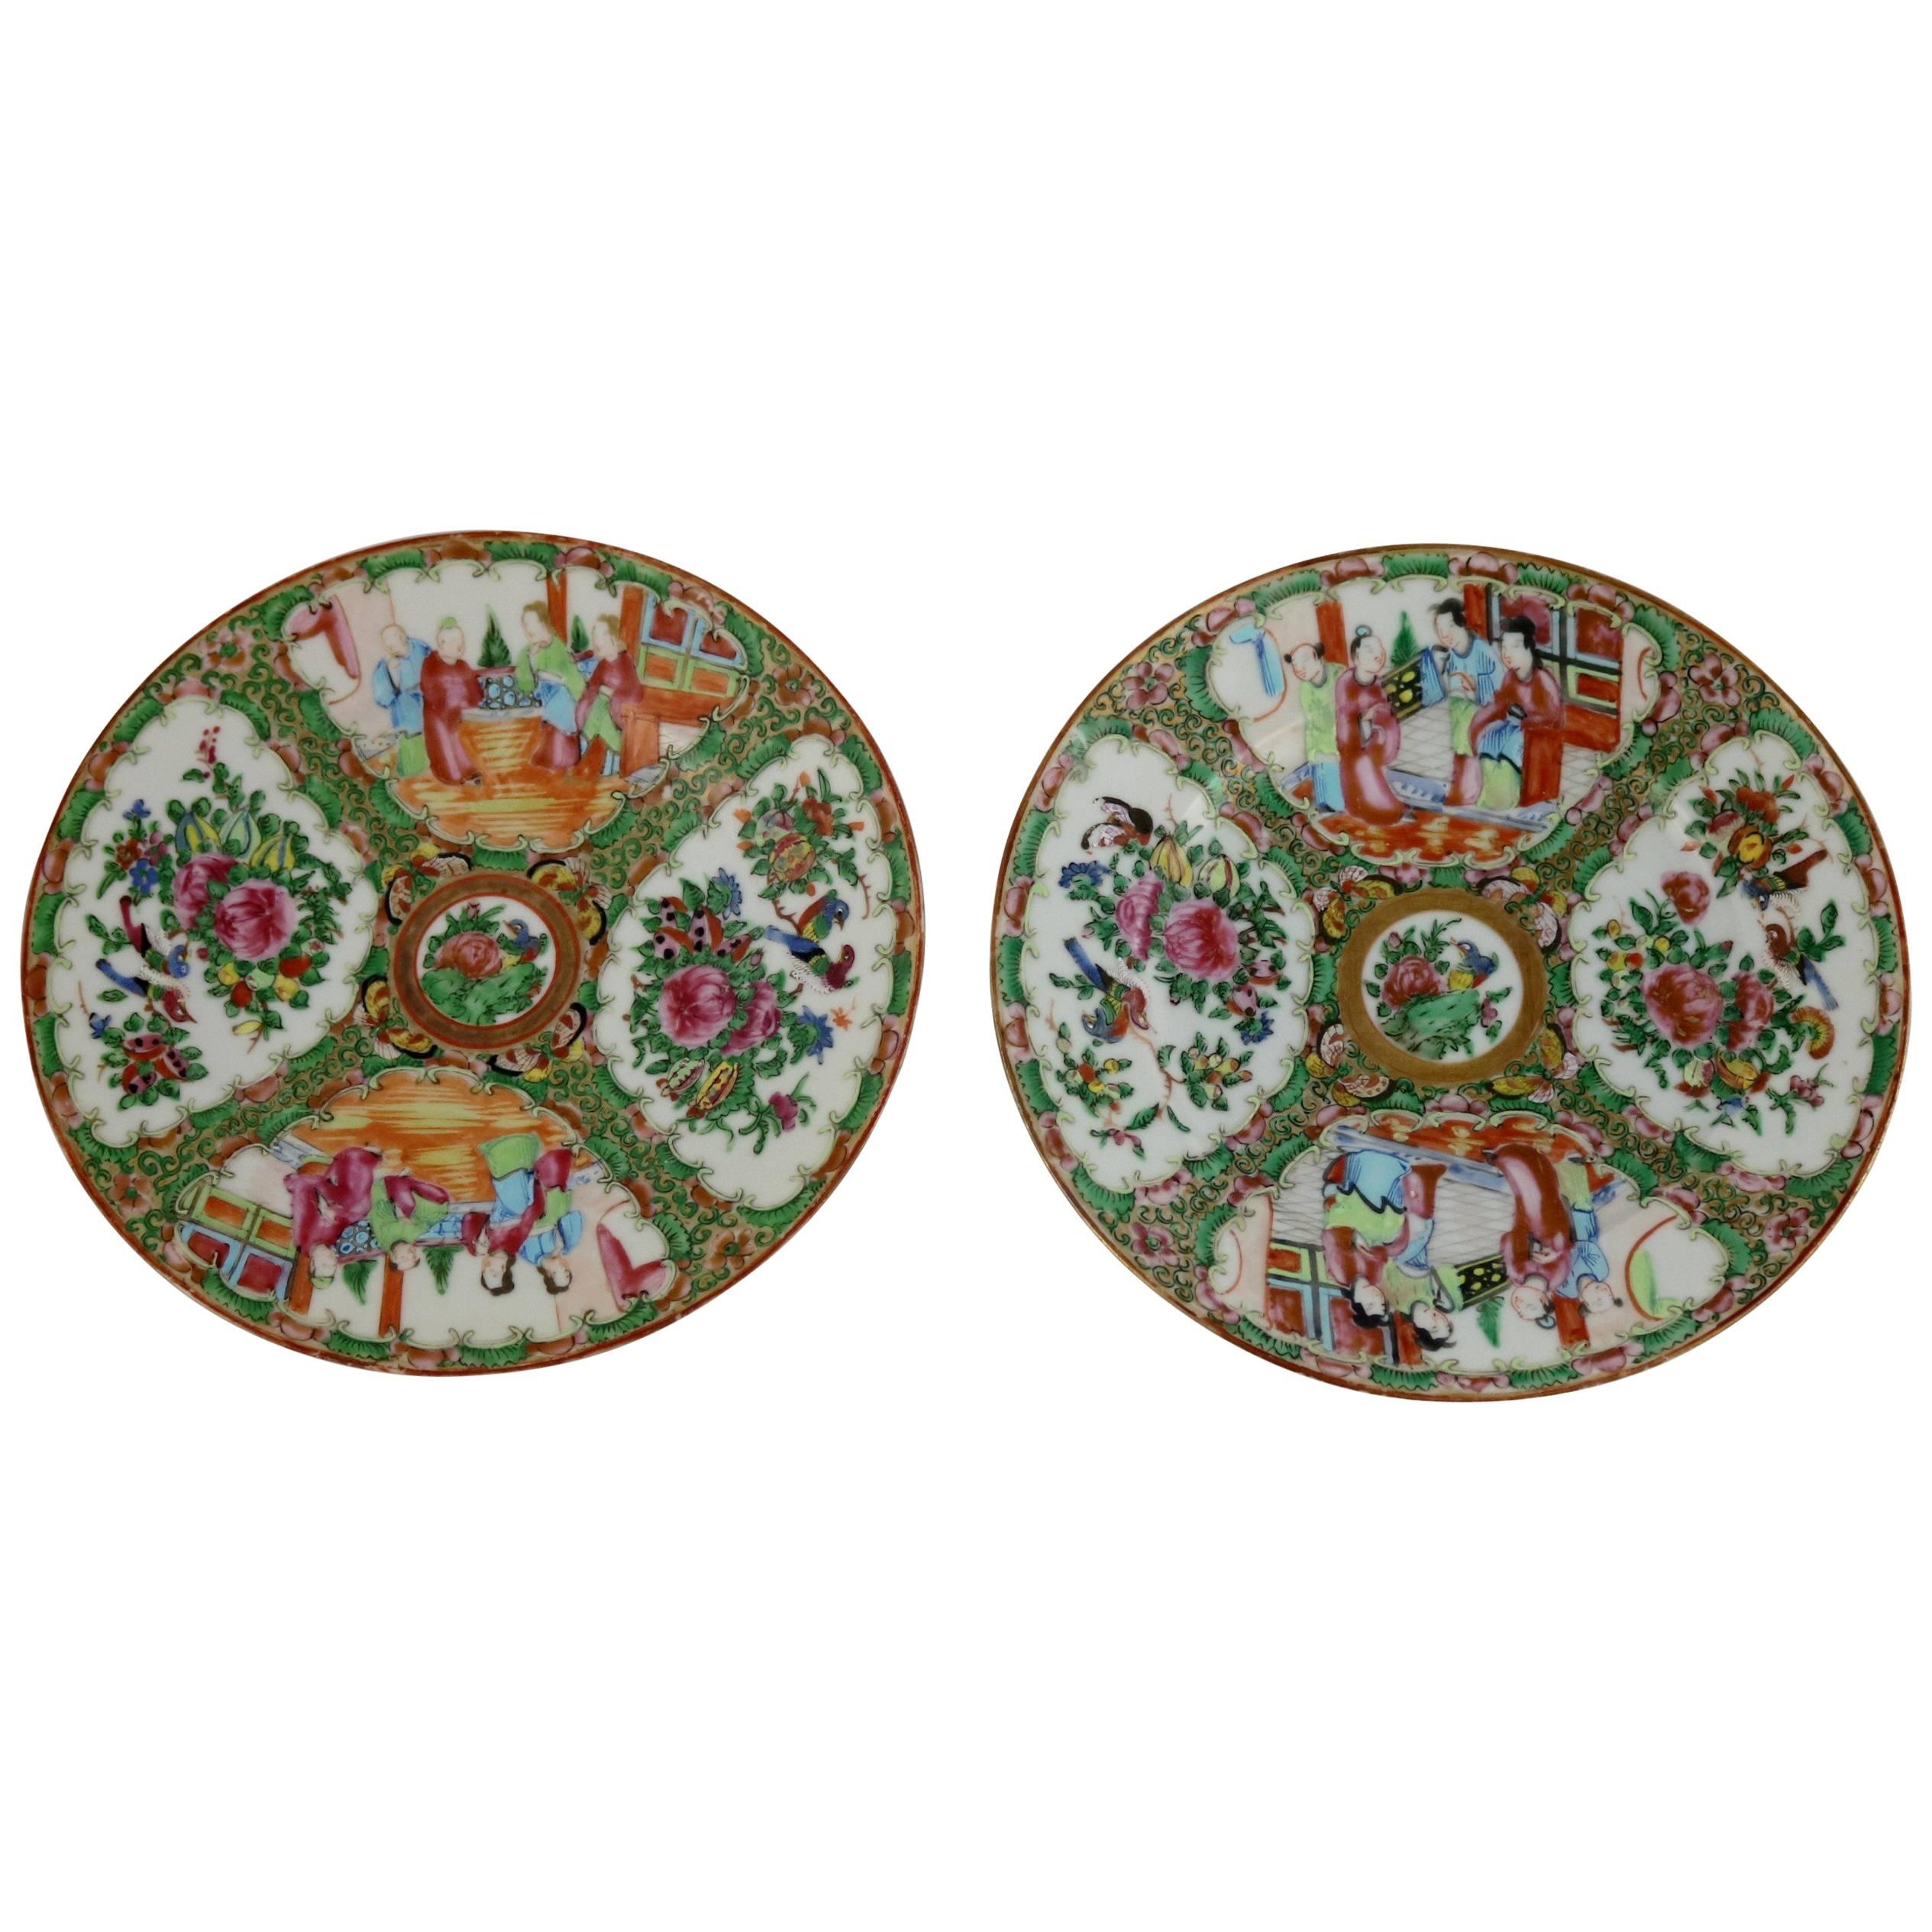 Antique Chinese Rose Medallion Porcelain Plates, Set of Two